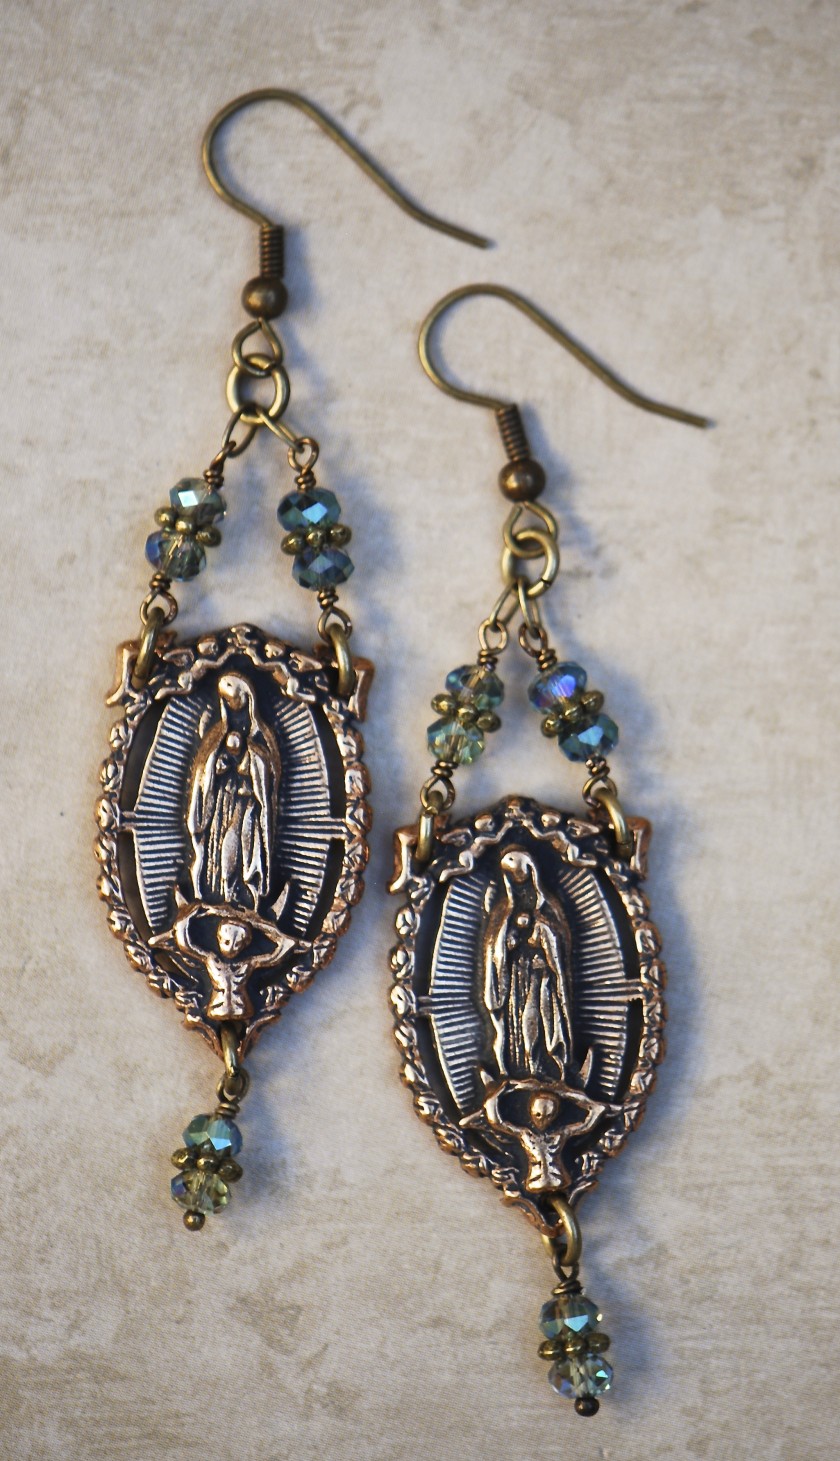 The Seraphym Earrings of Our Lady of Guadalupe